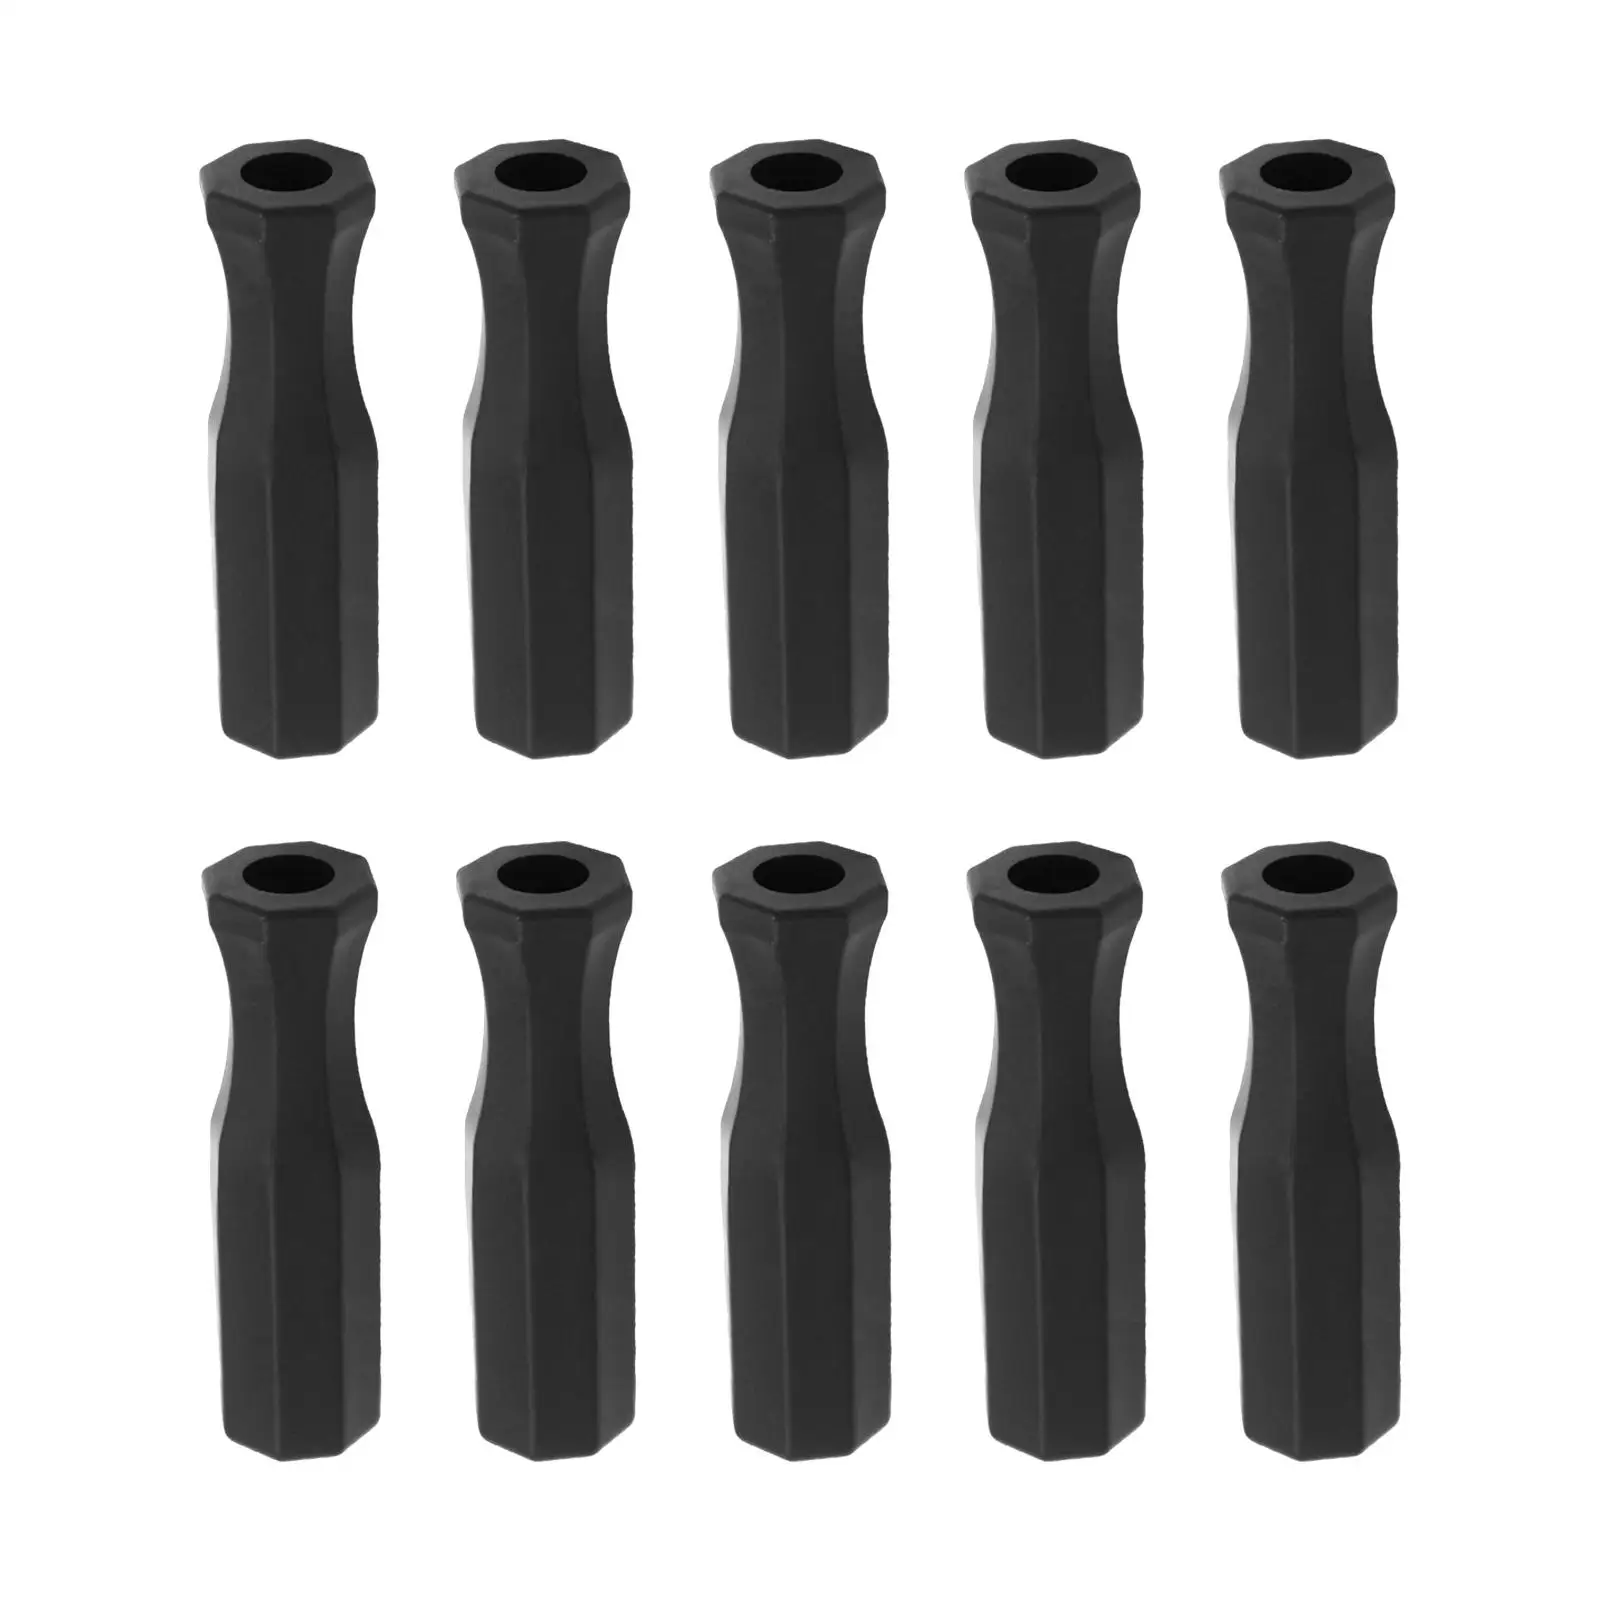 10pcs Durable Table Soccer Parts Replacement Kids Children Football Handle For Standard Foosball Tables Soccer Equipment